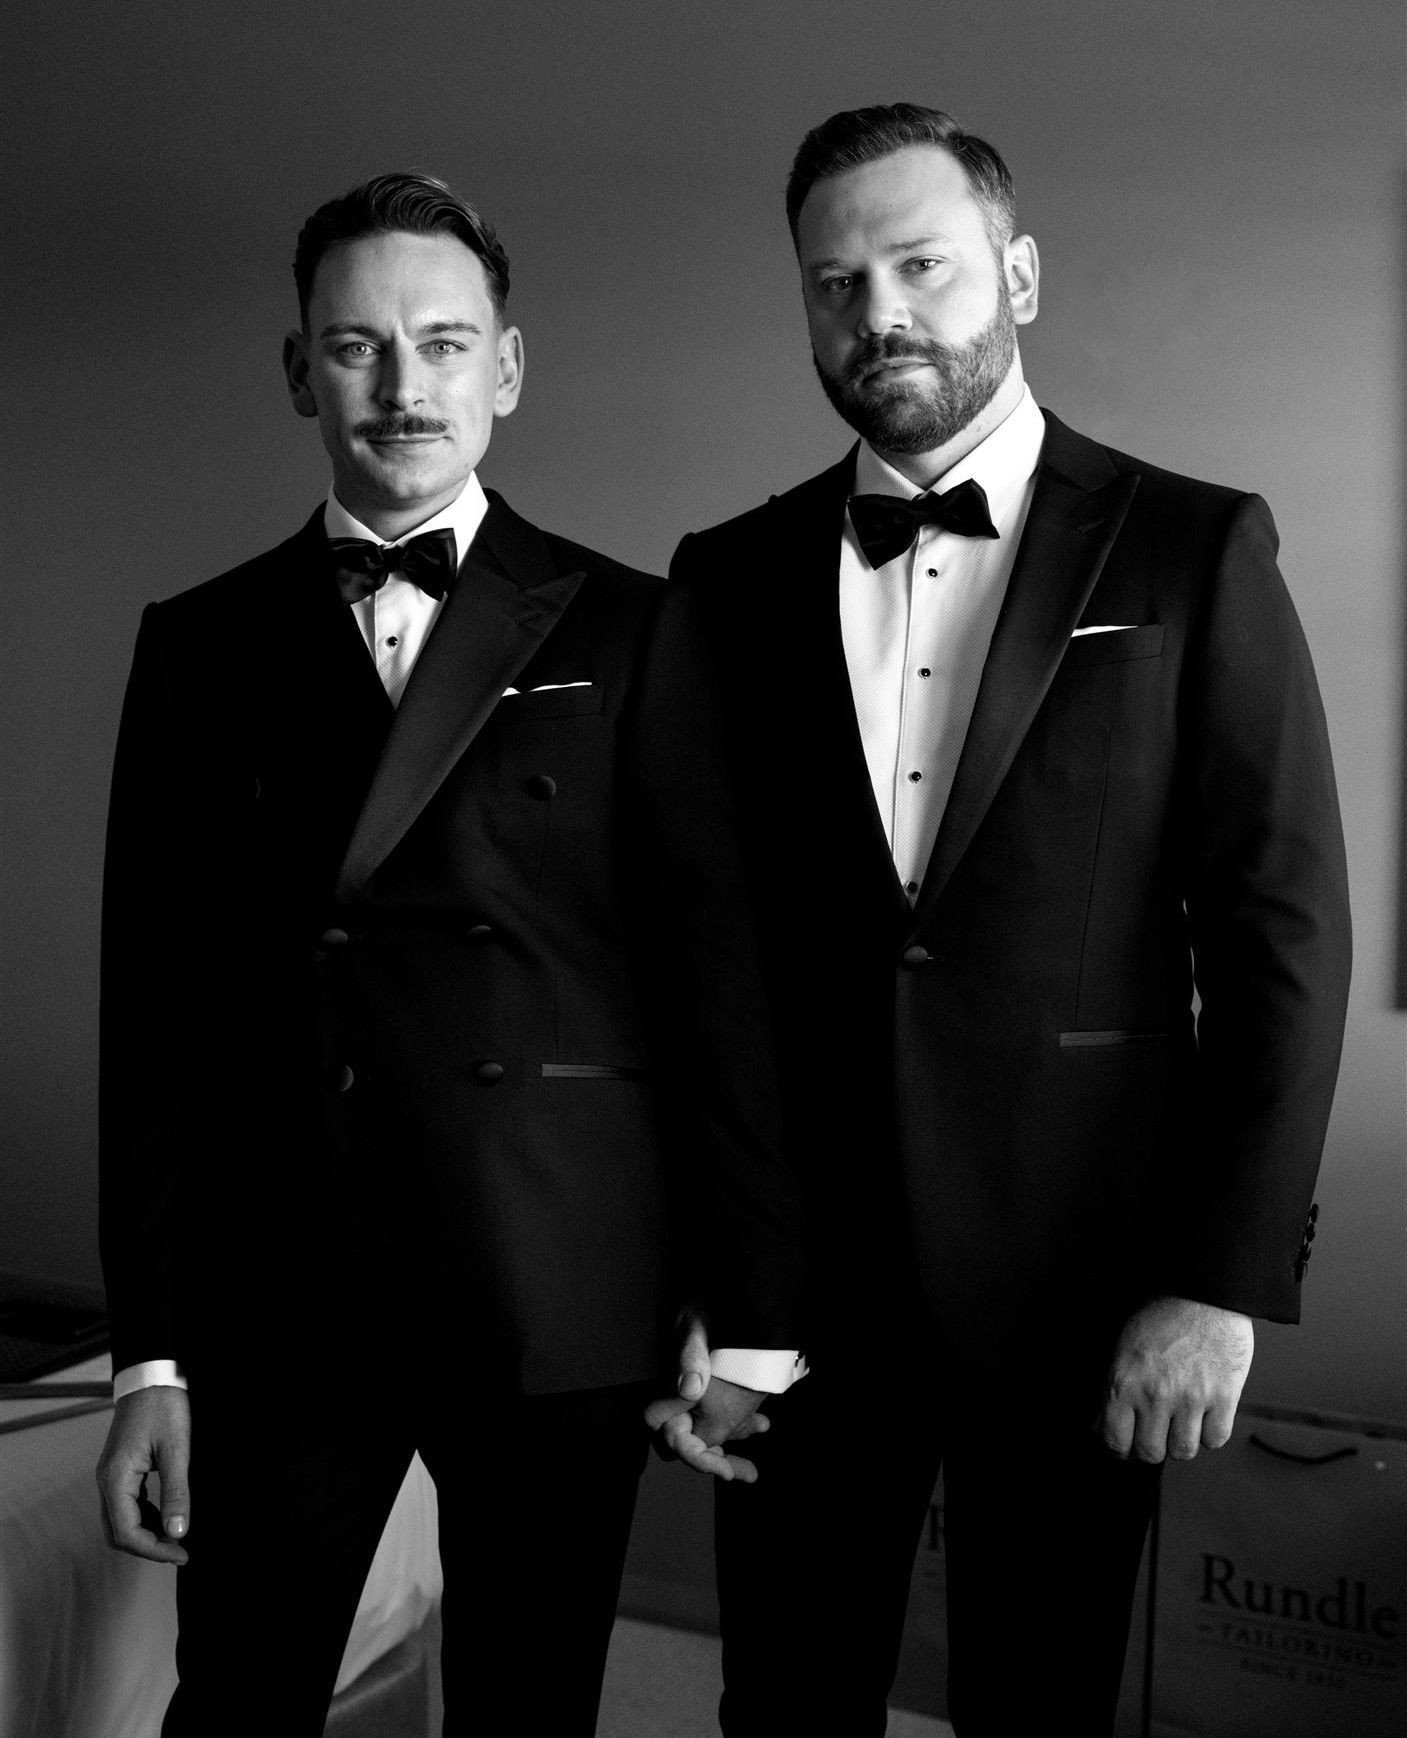 NAME A BETTER LOOKING DUO.⁠
⁠
YOU CAN'T! YOU WON'T!⁠
⁠
We've got so much love for these gorgeous Grooms and we cannot wait to share more from their wedding day. 🖤